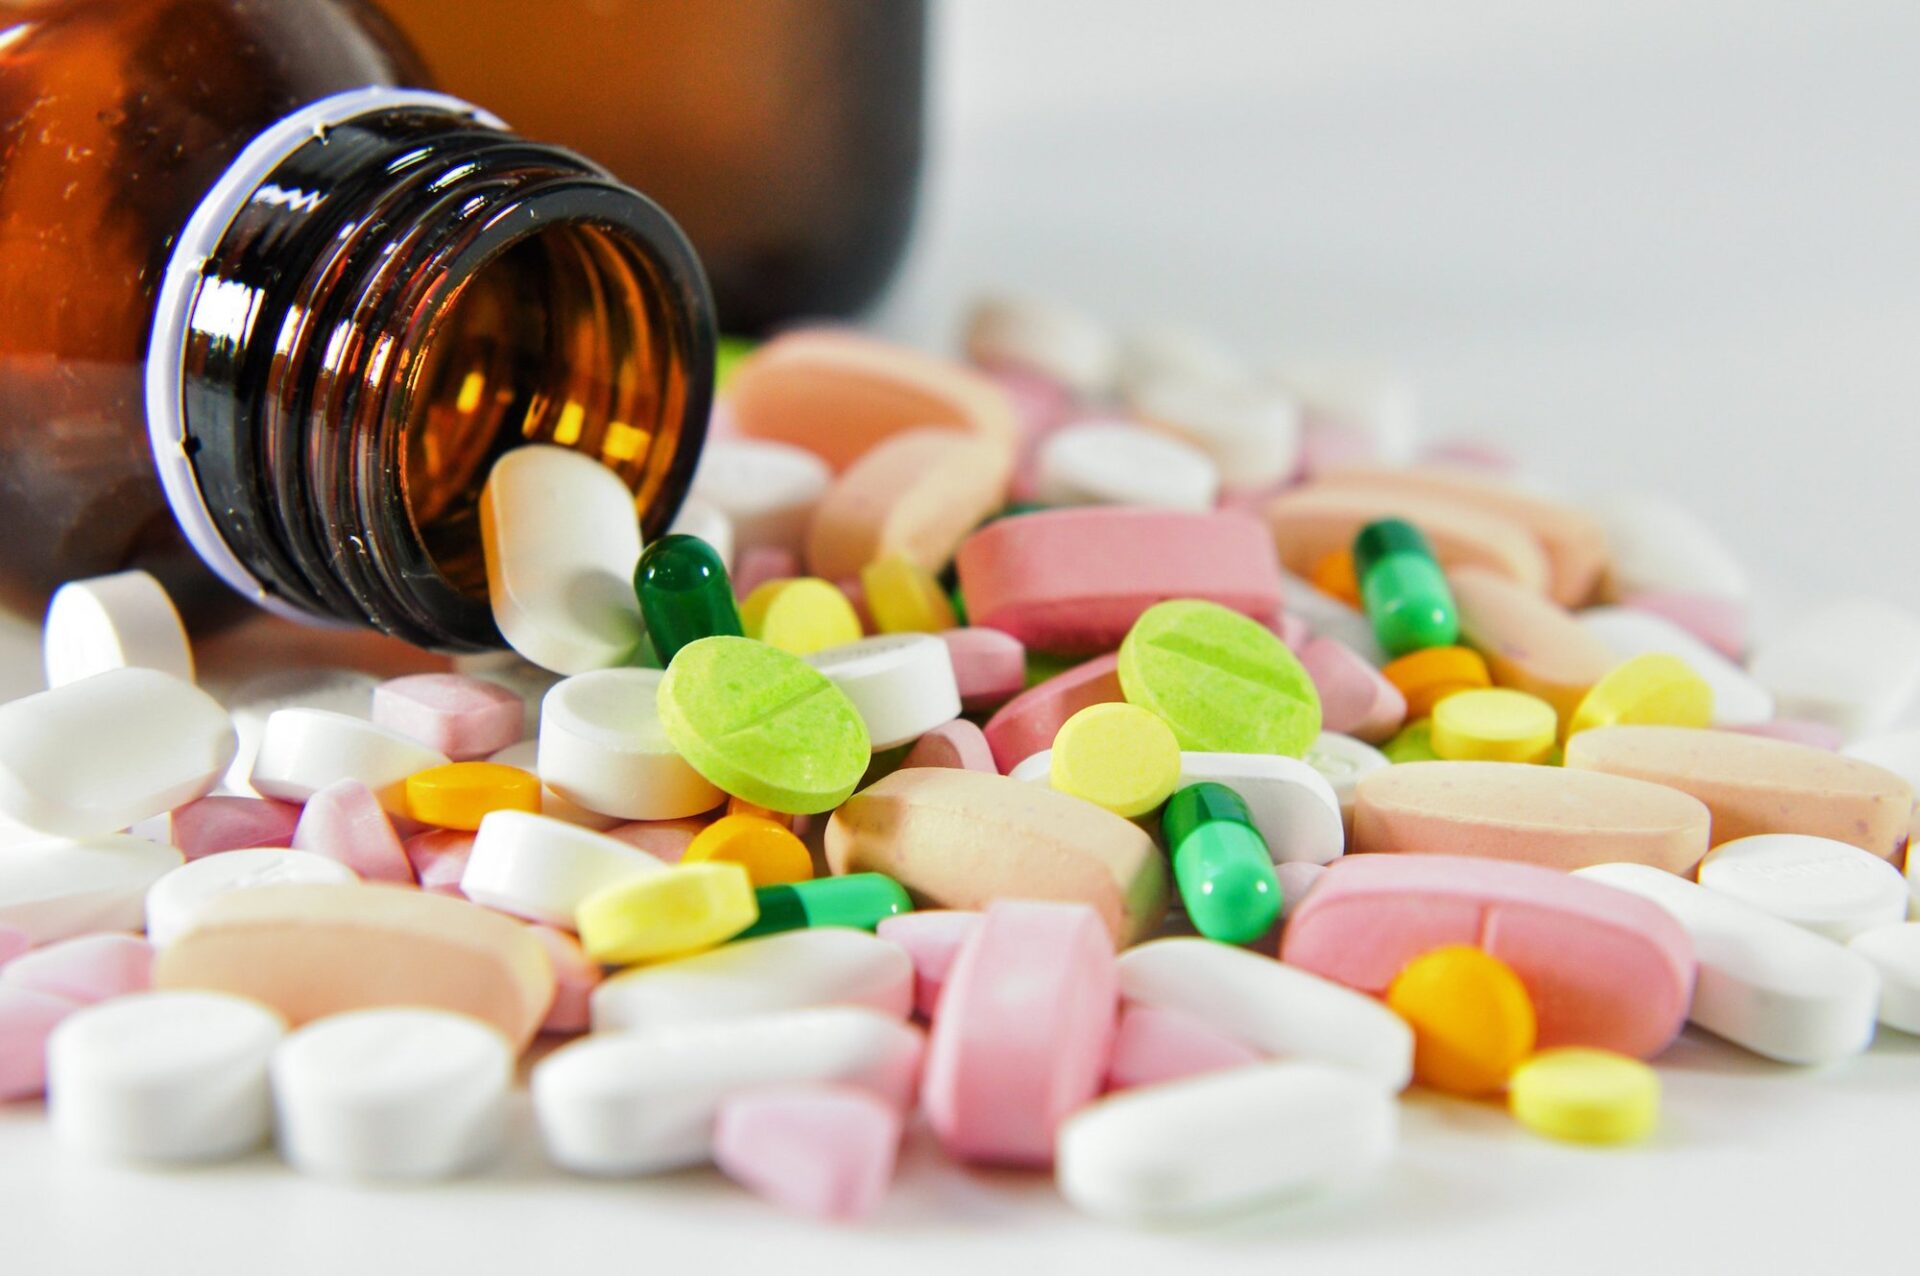 Global Pharmacovigilance Market Is Estimated To Witness High Growth